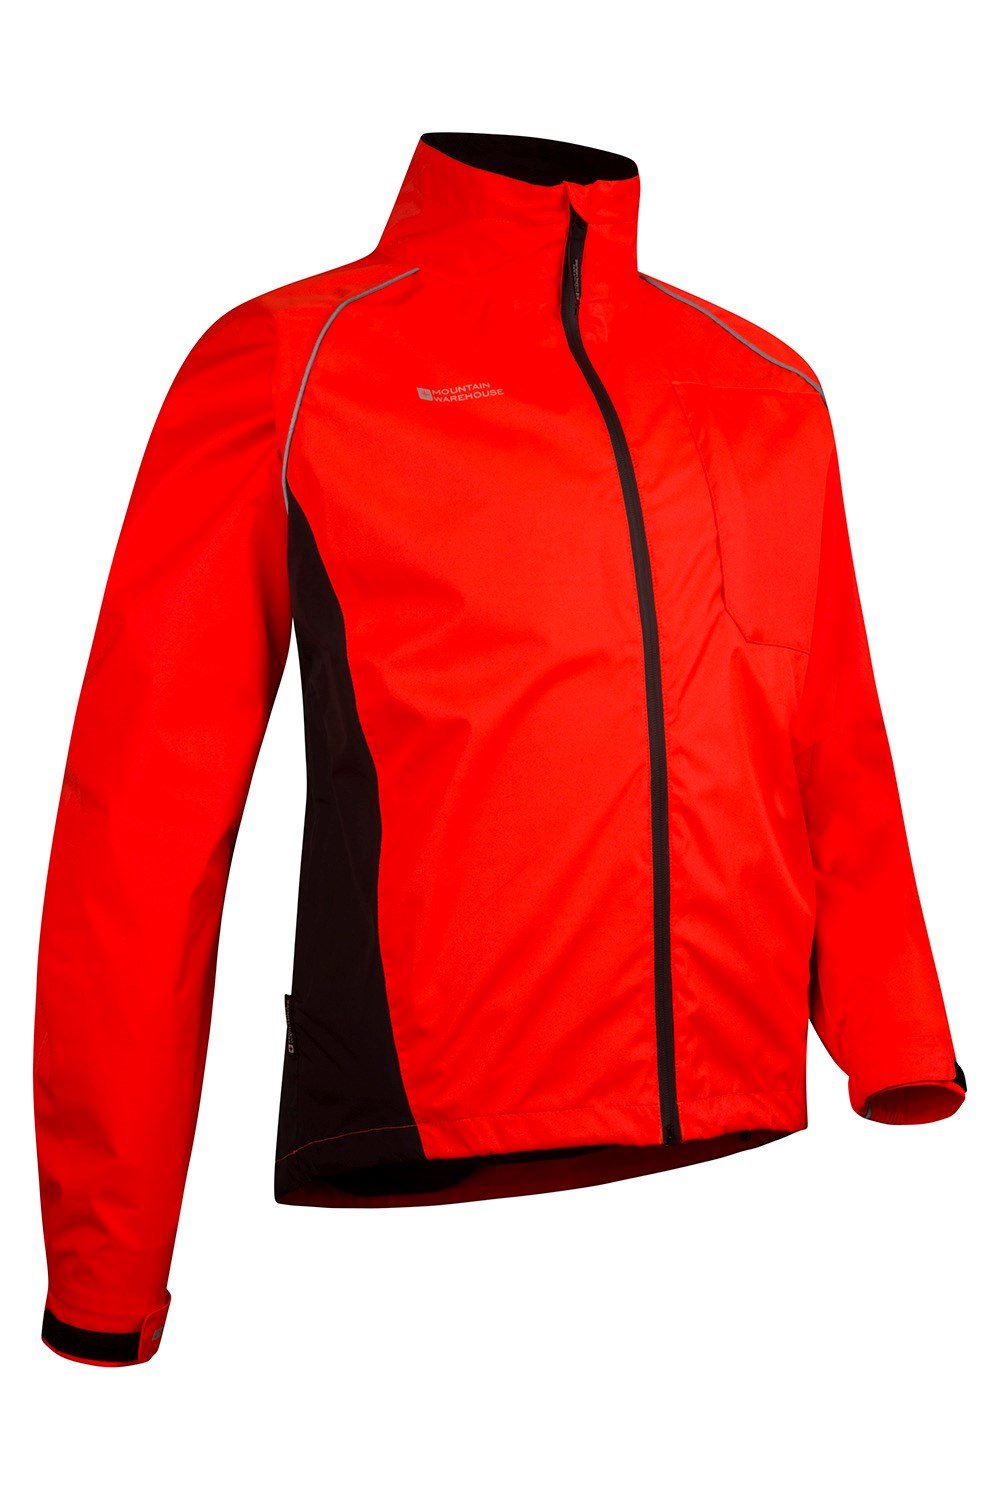 Mountain Warehouse Adrenaline Mens Bike Jacket Coat in Red with Pit ...